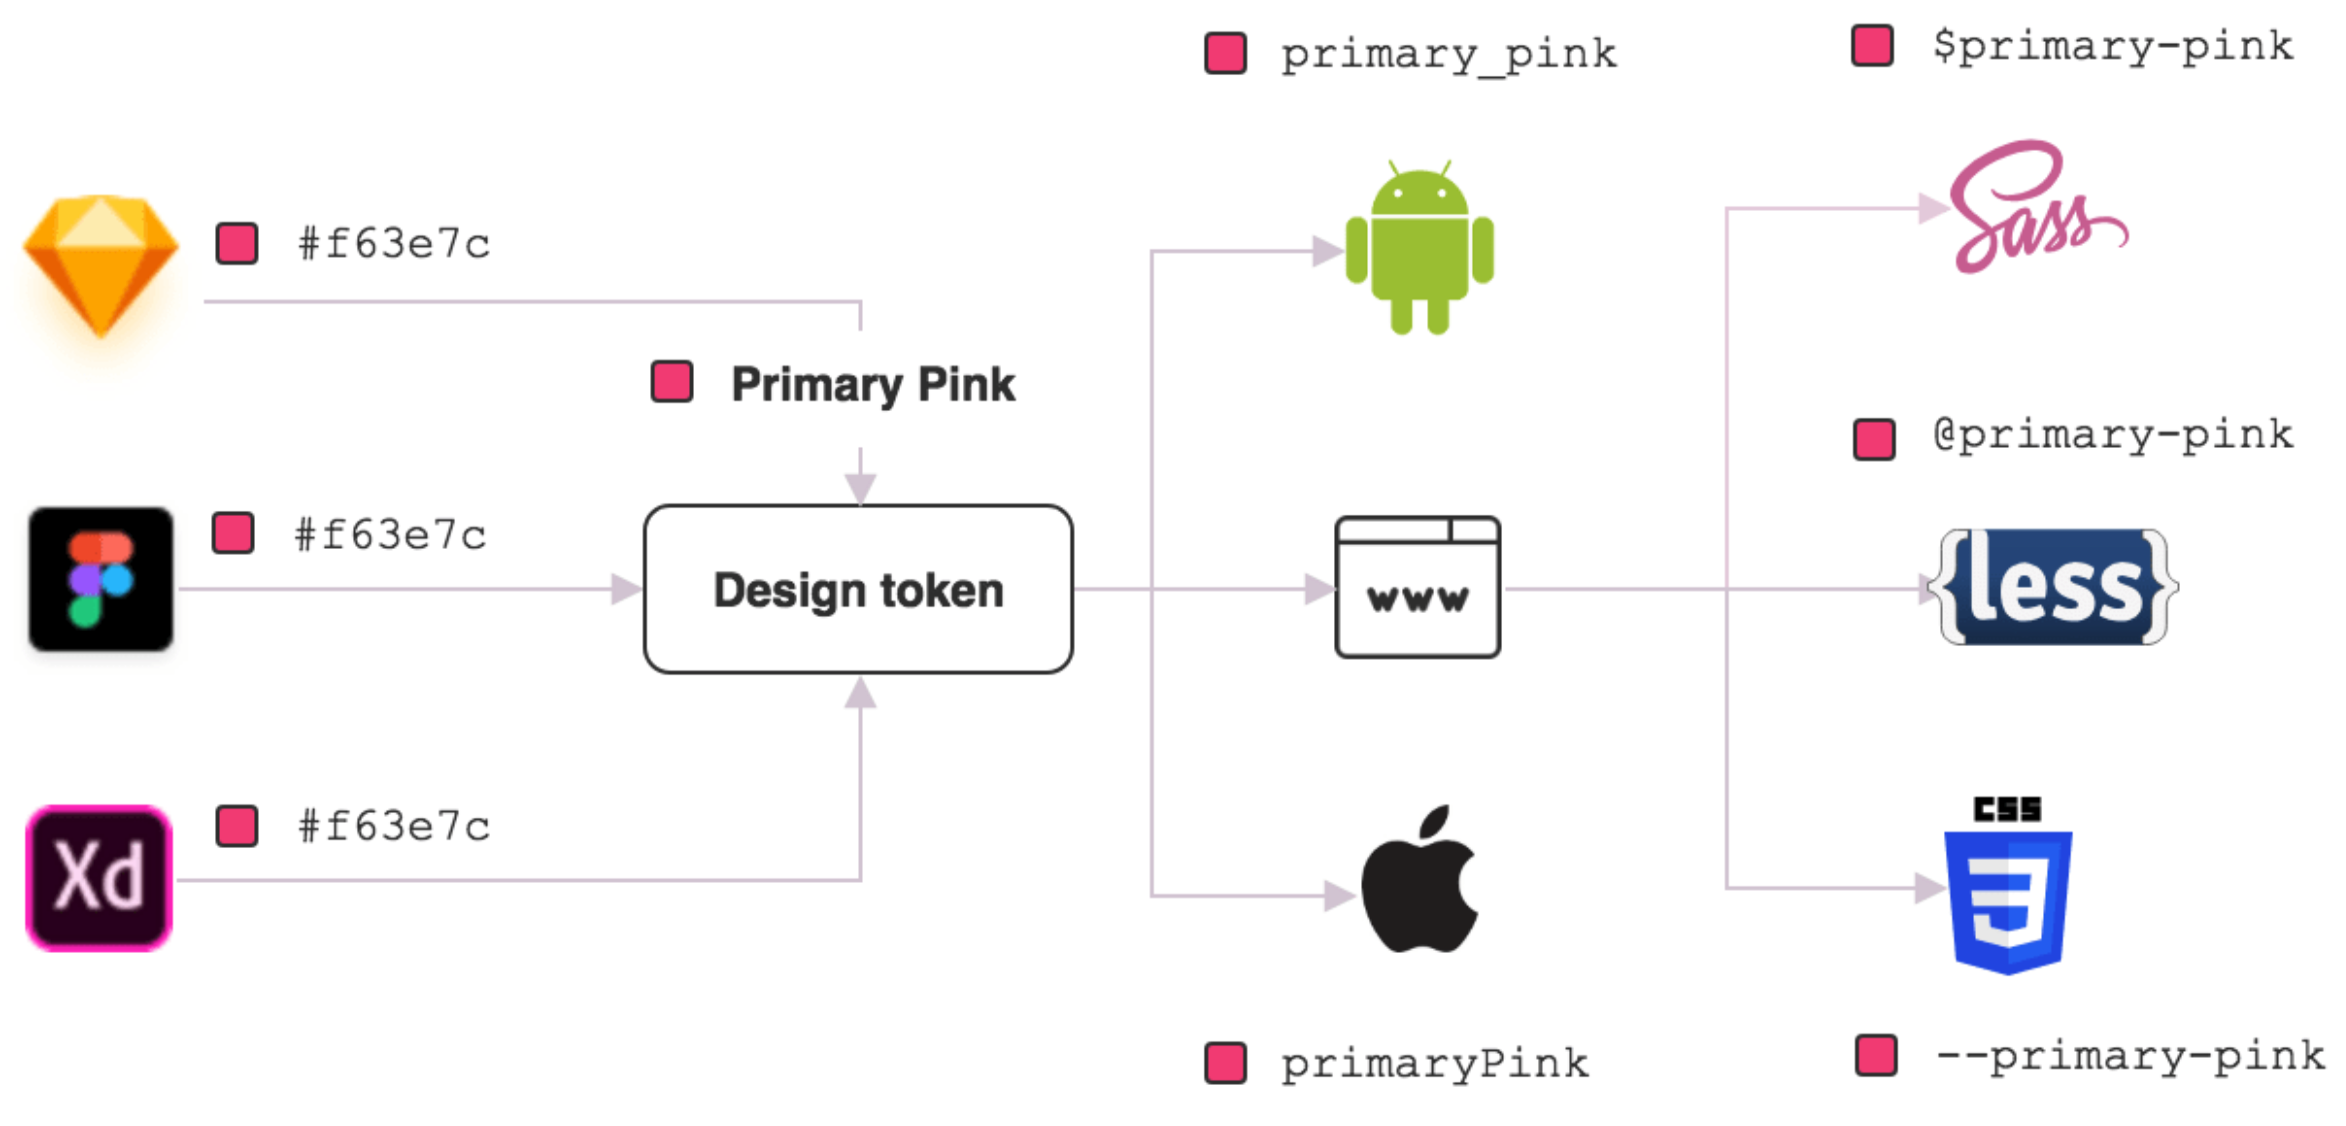 Diagram showing how a design token is made